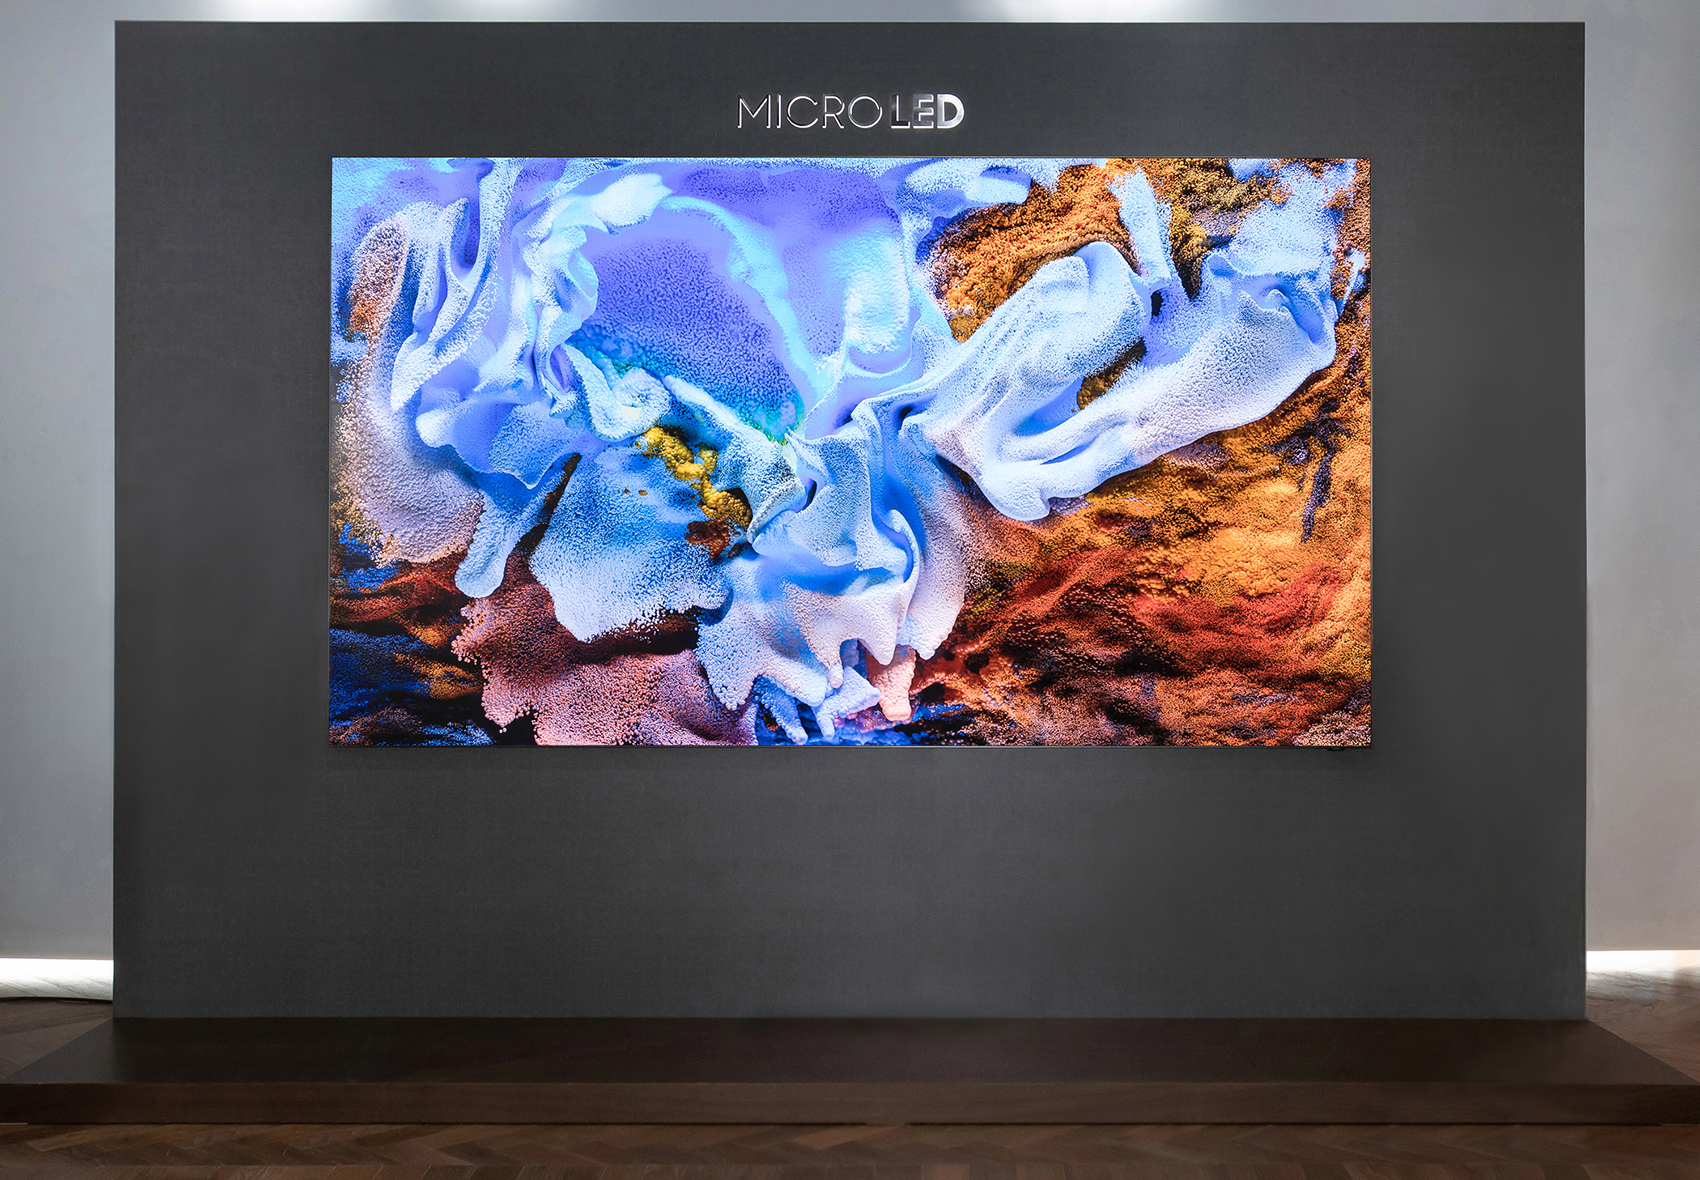 Samsung supposedly starts large scale manufacturing of 89-inch MicroLED televisions